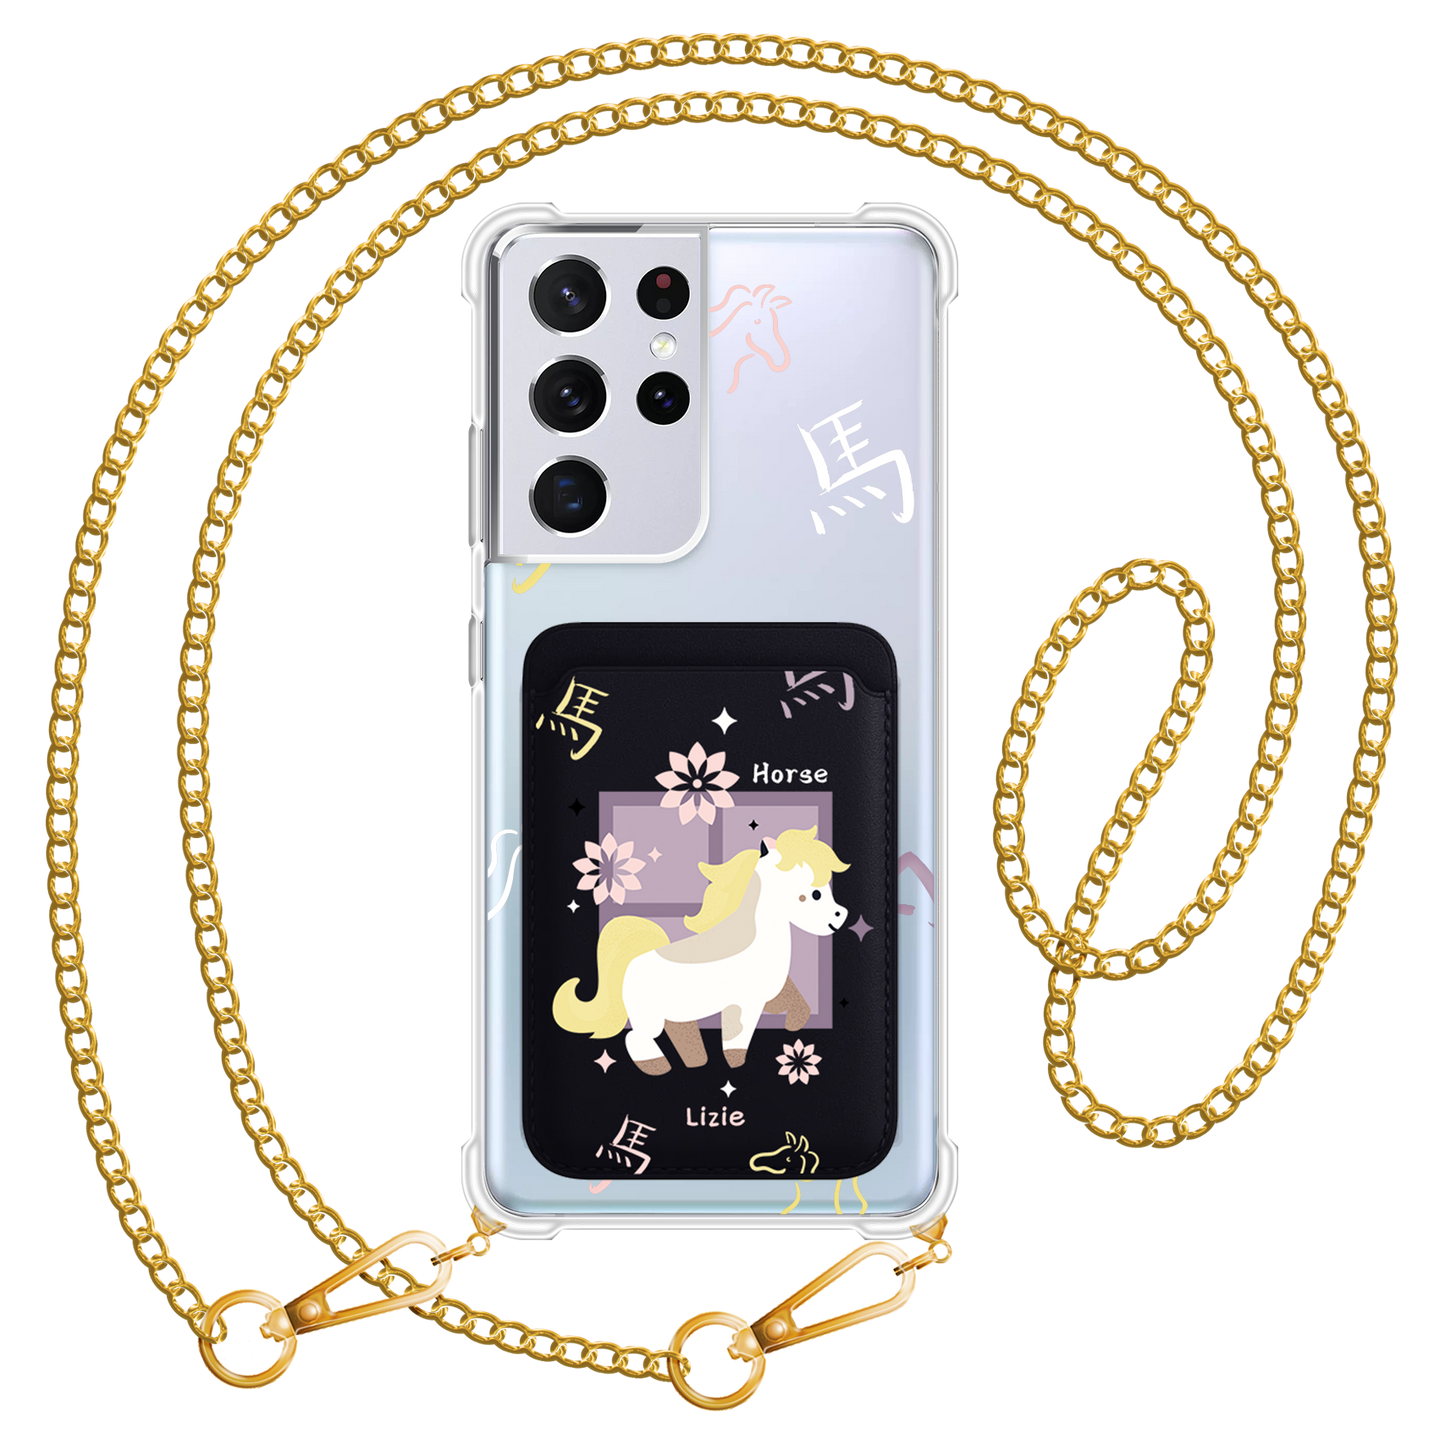 Android Magnetic Wallet Case - Horse (Chinese Zodiac / Shio)